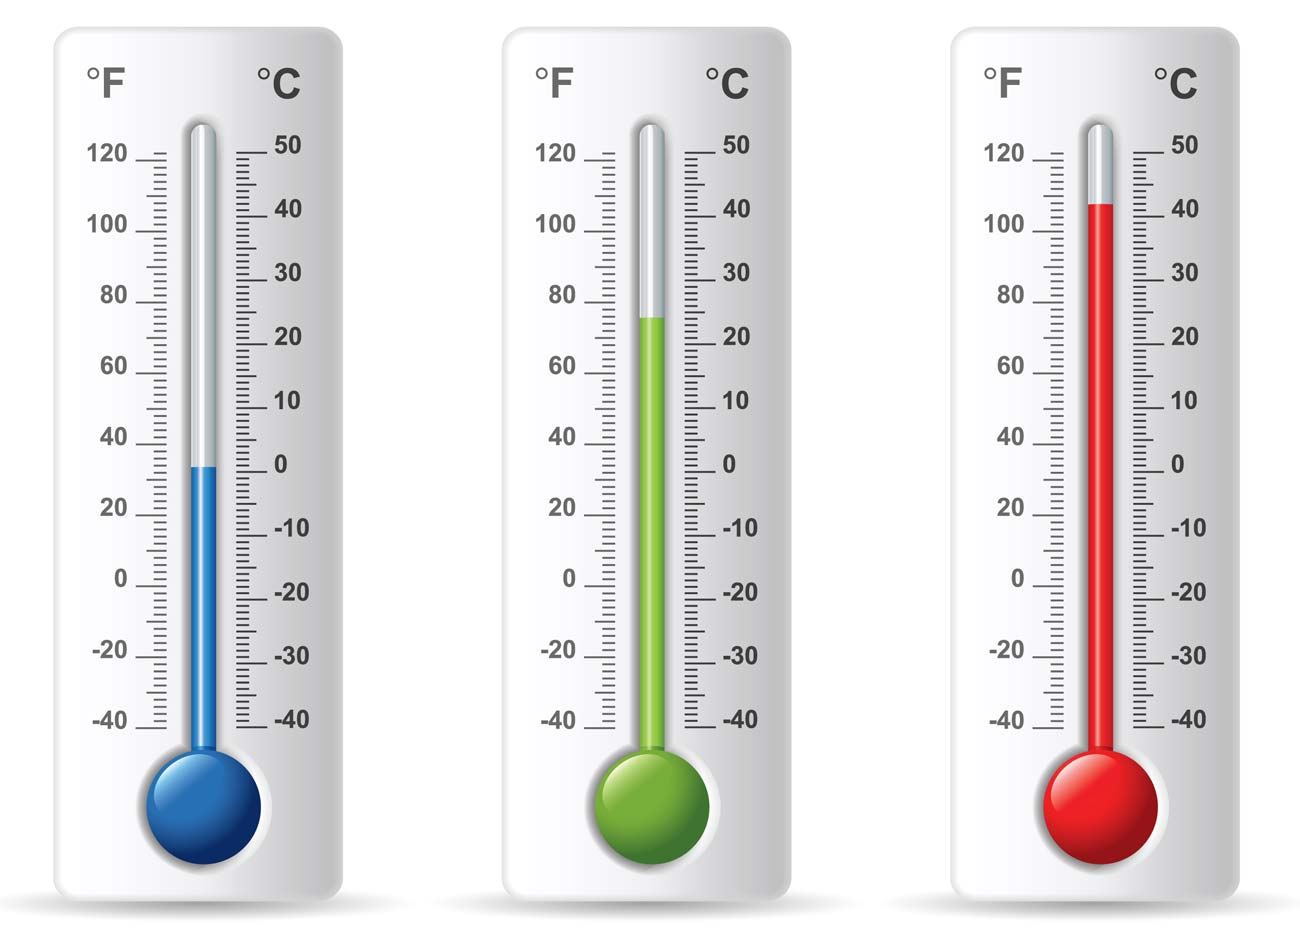 Thermometer readings